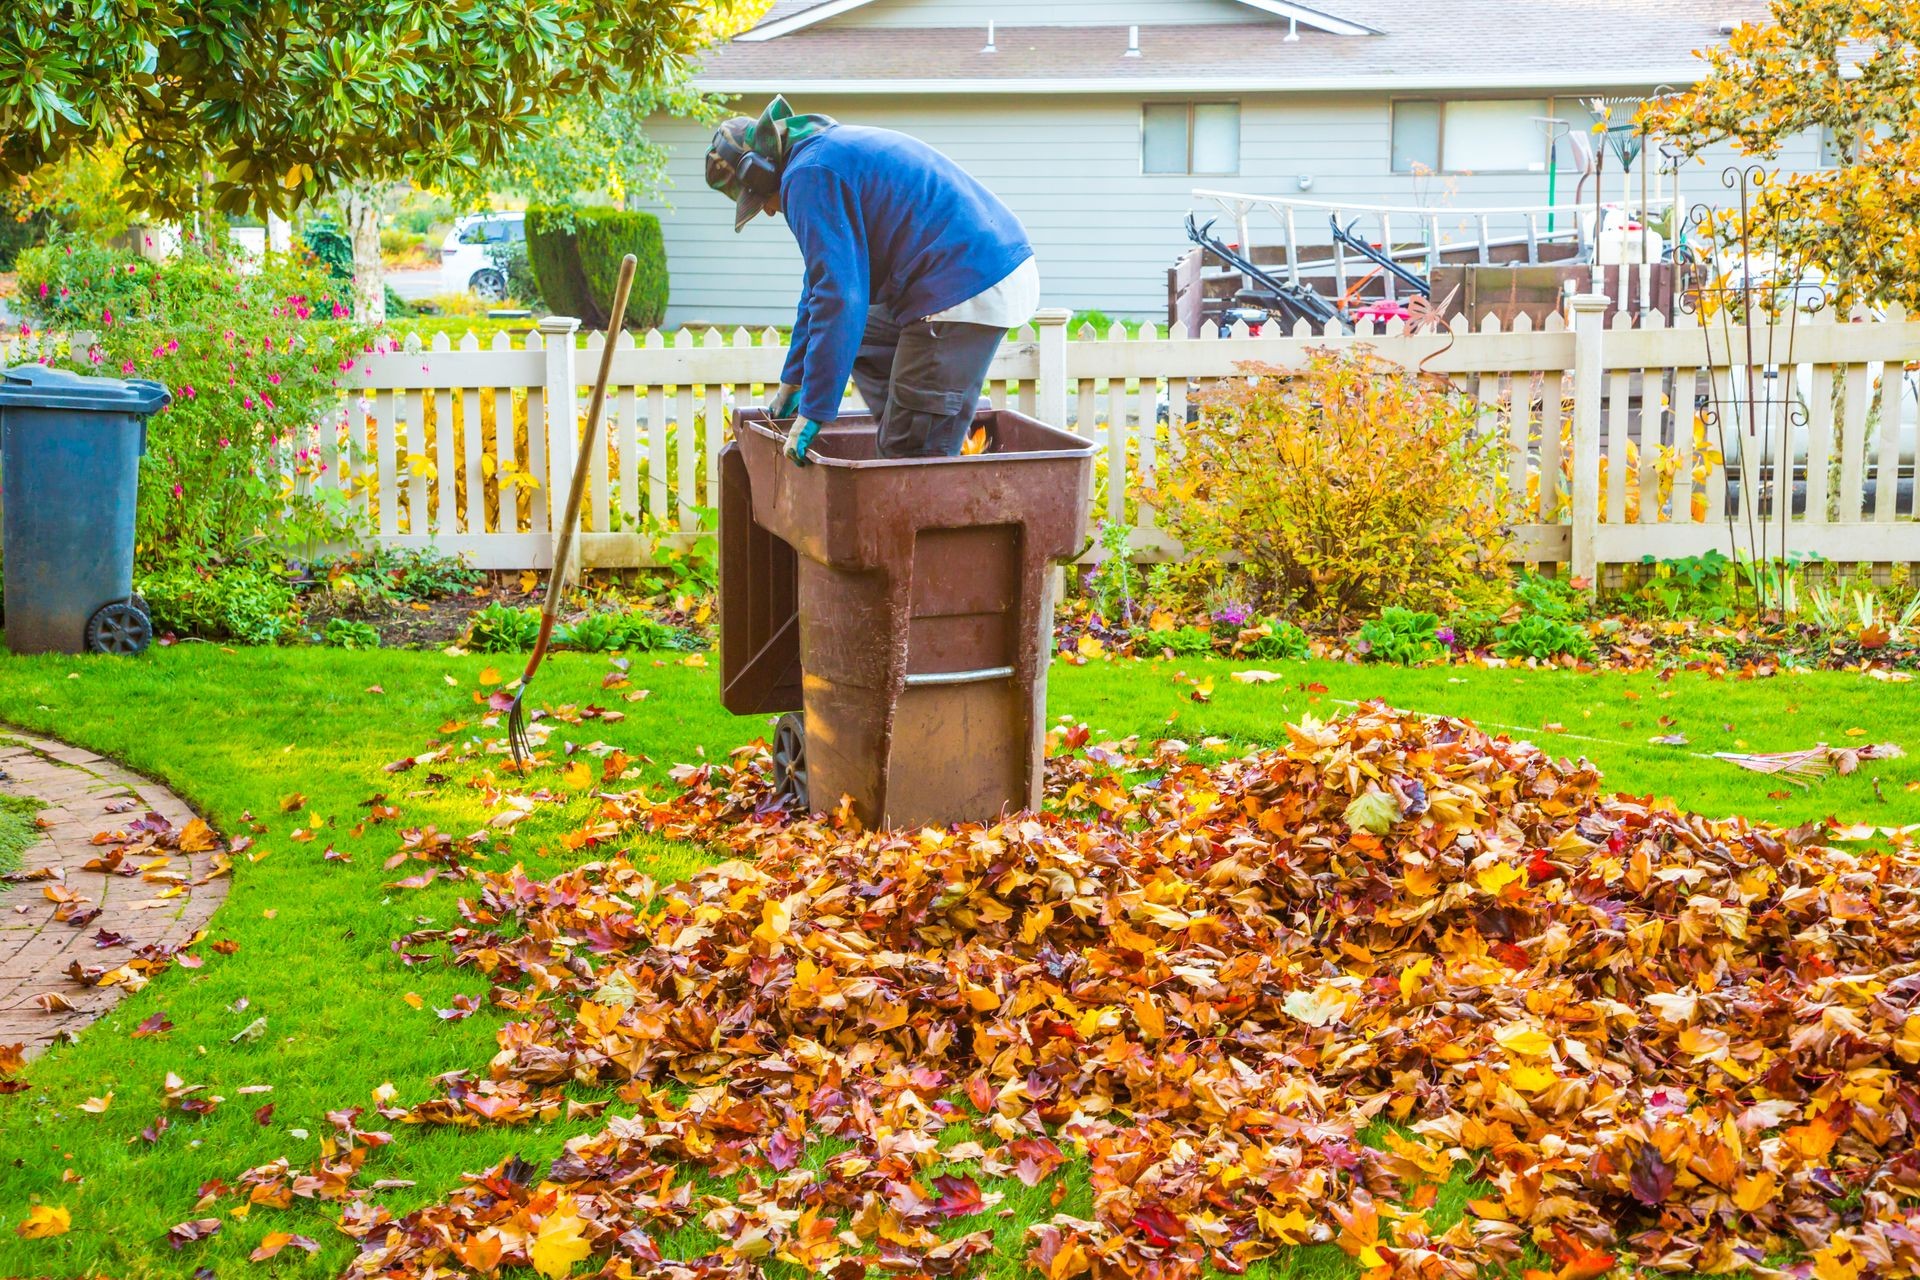 Man loading maple tree leaves in container to be transported to composting site